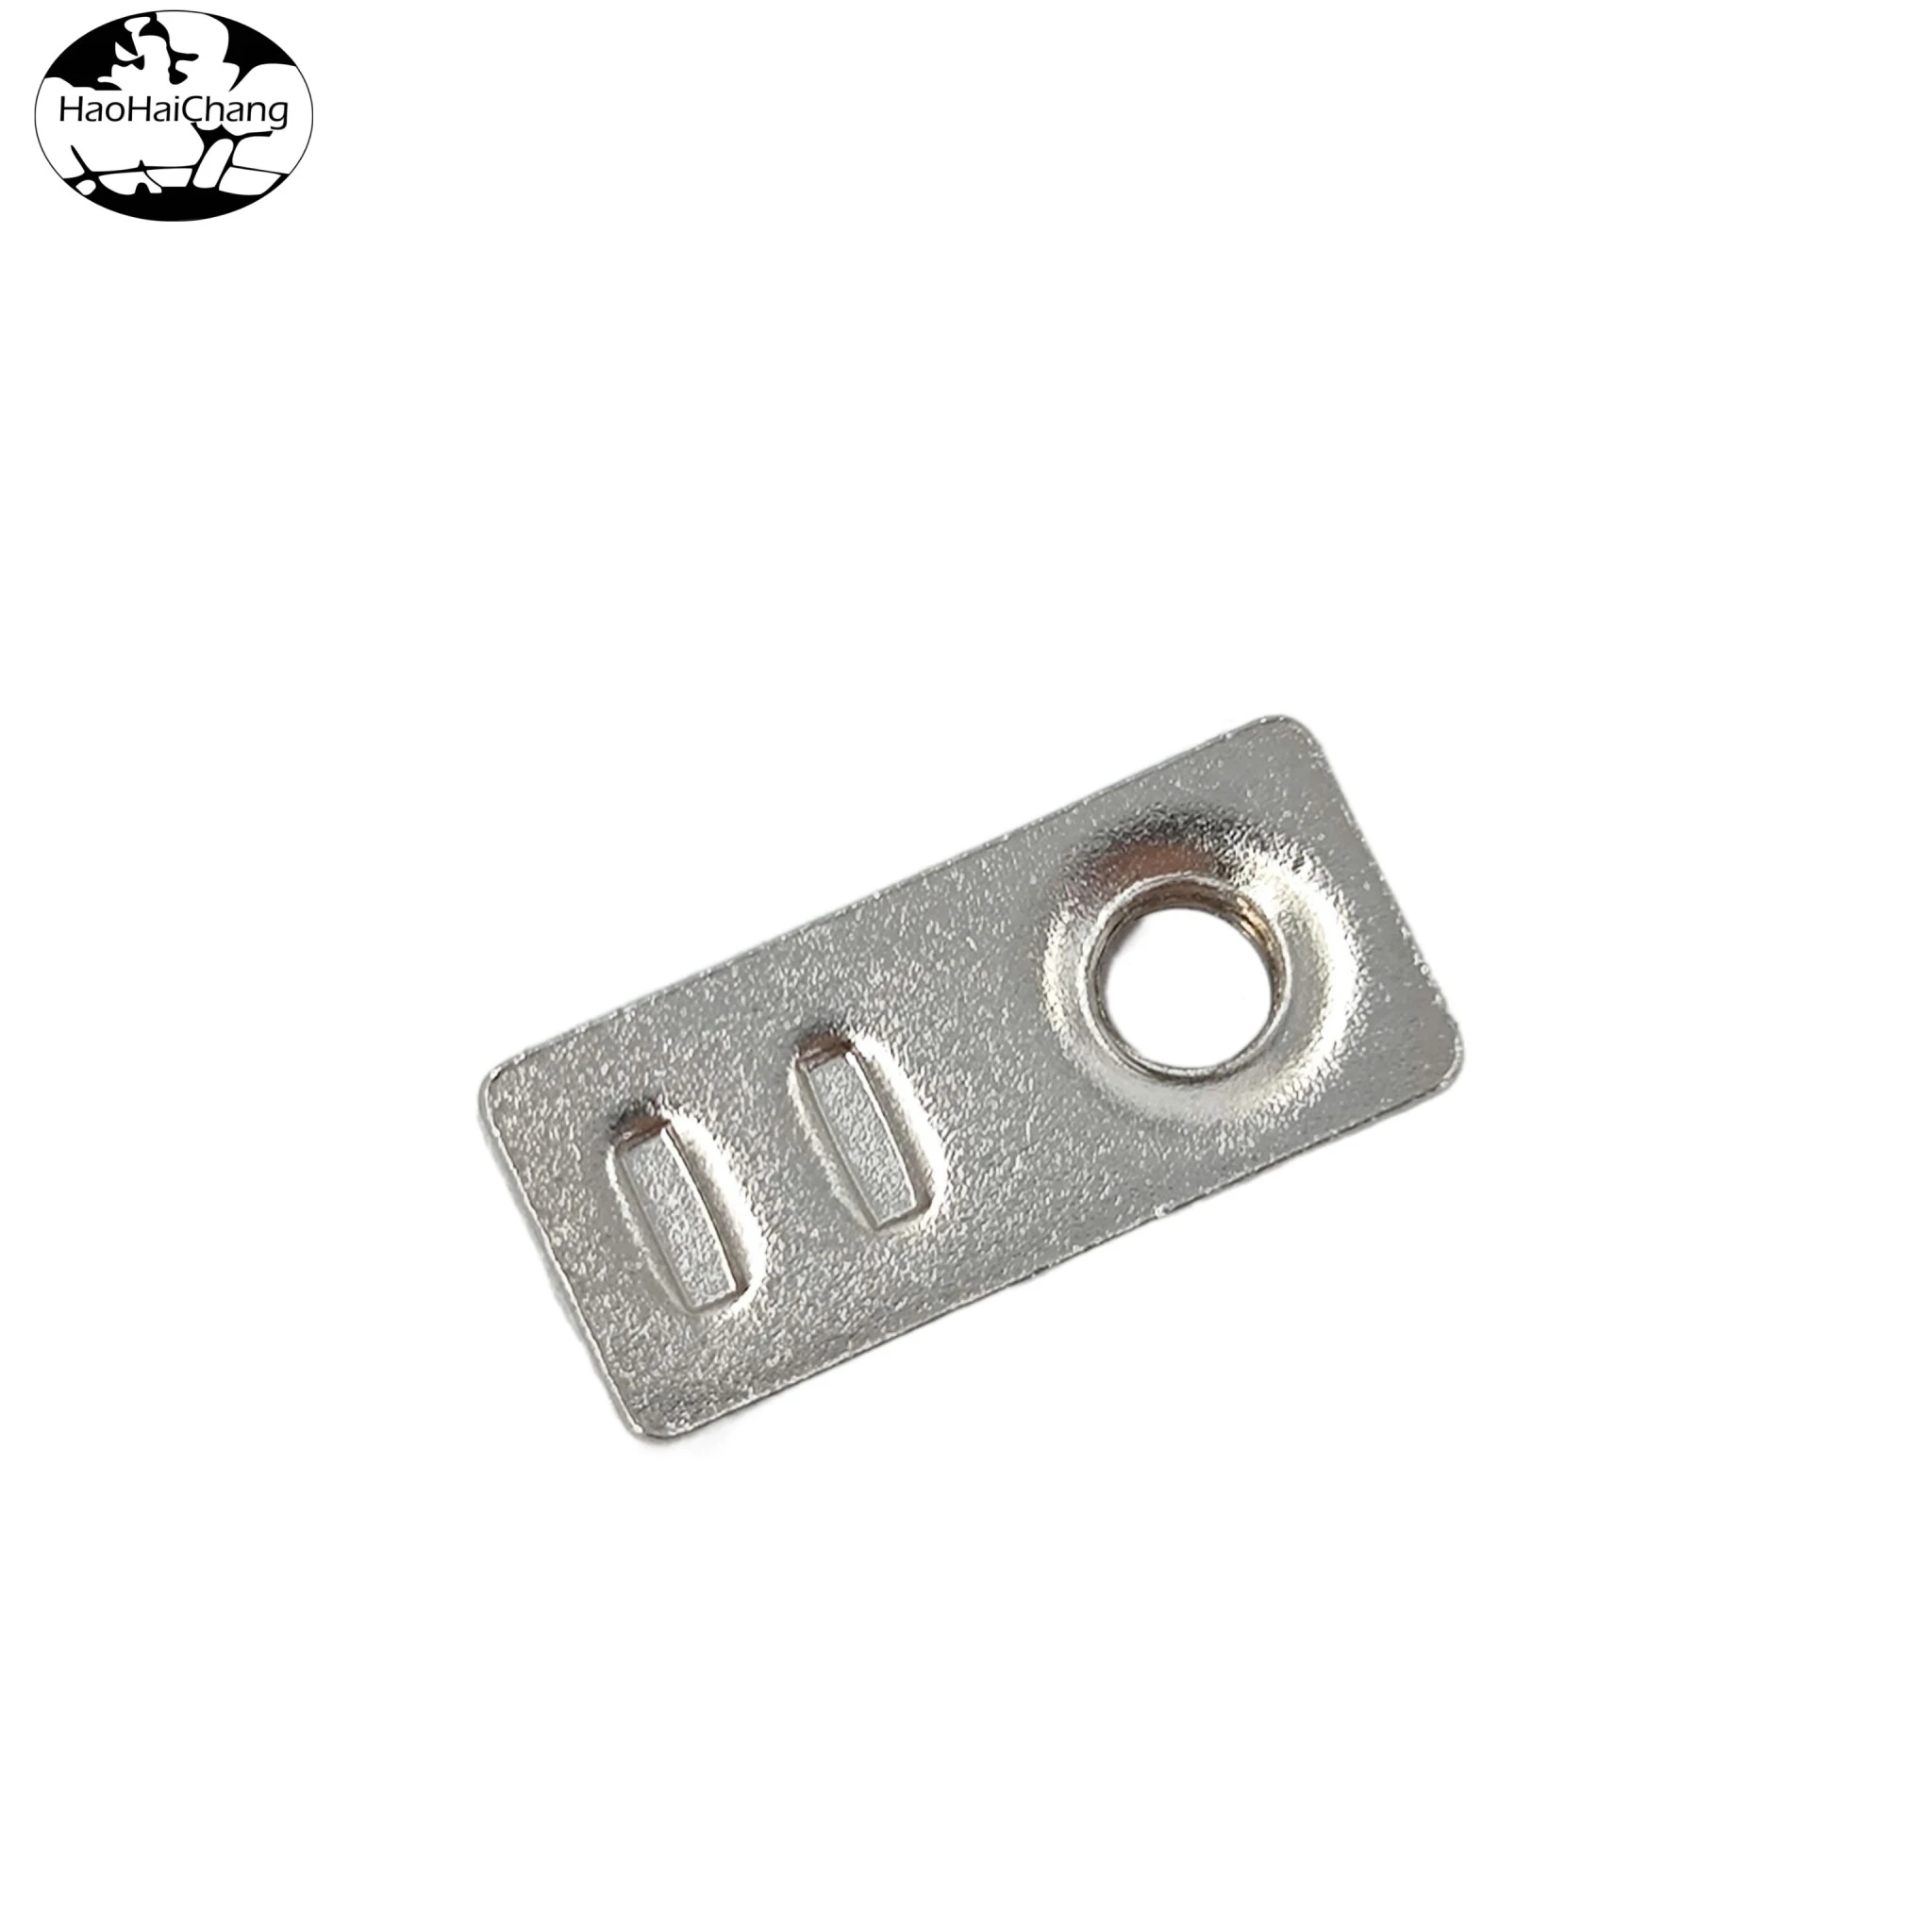 HHC-0246 Connector